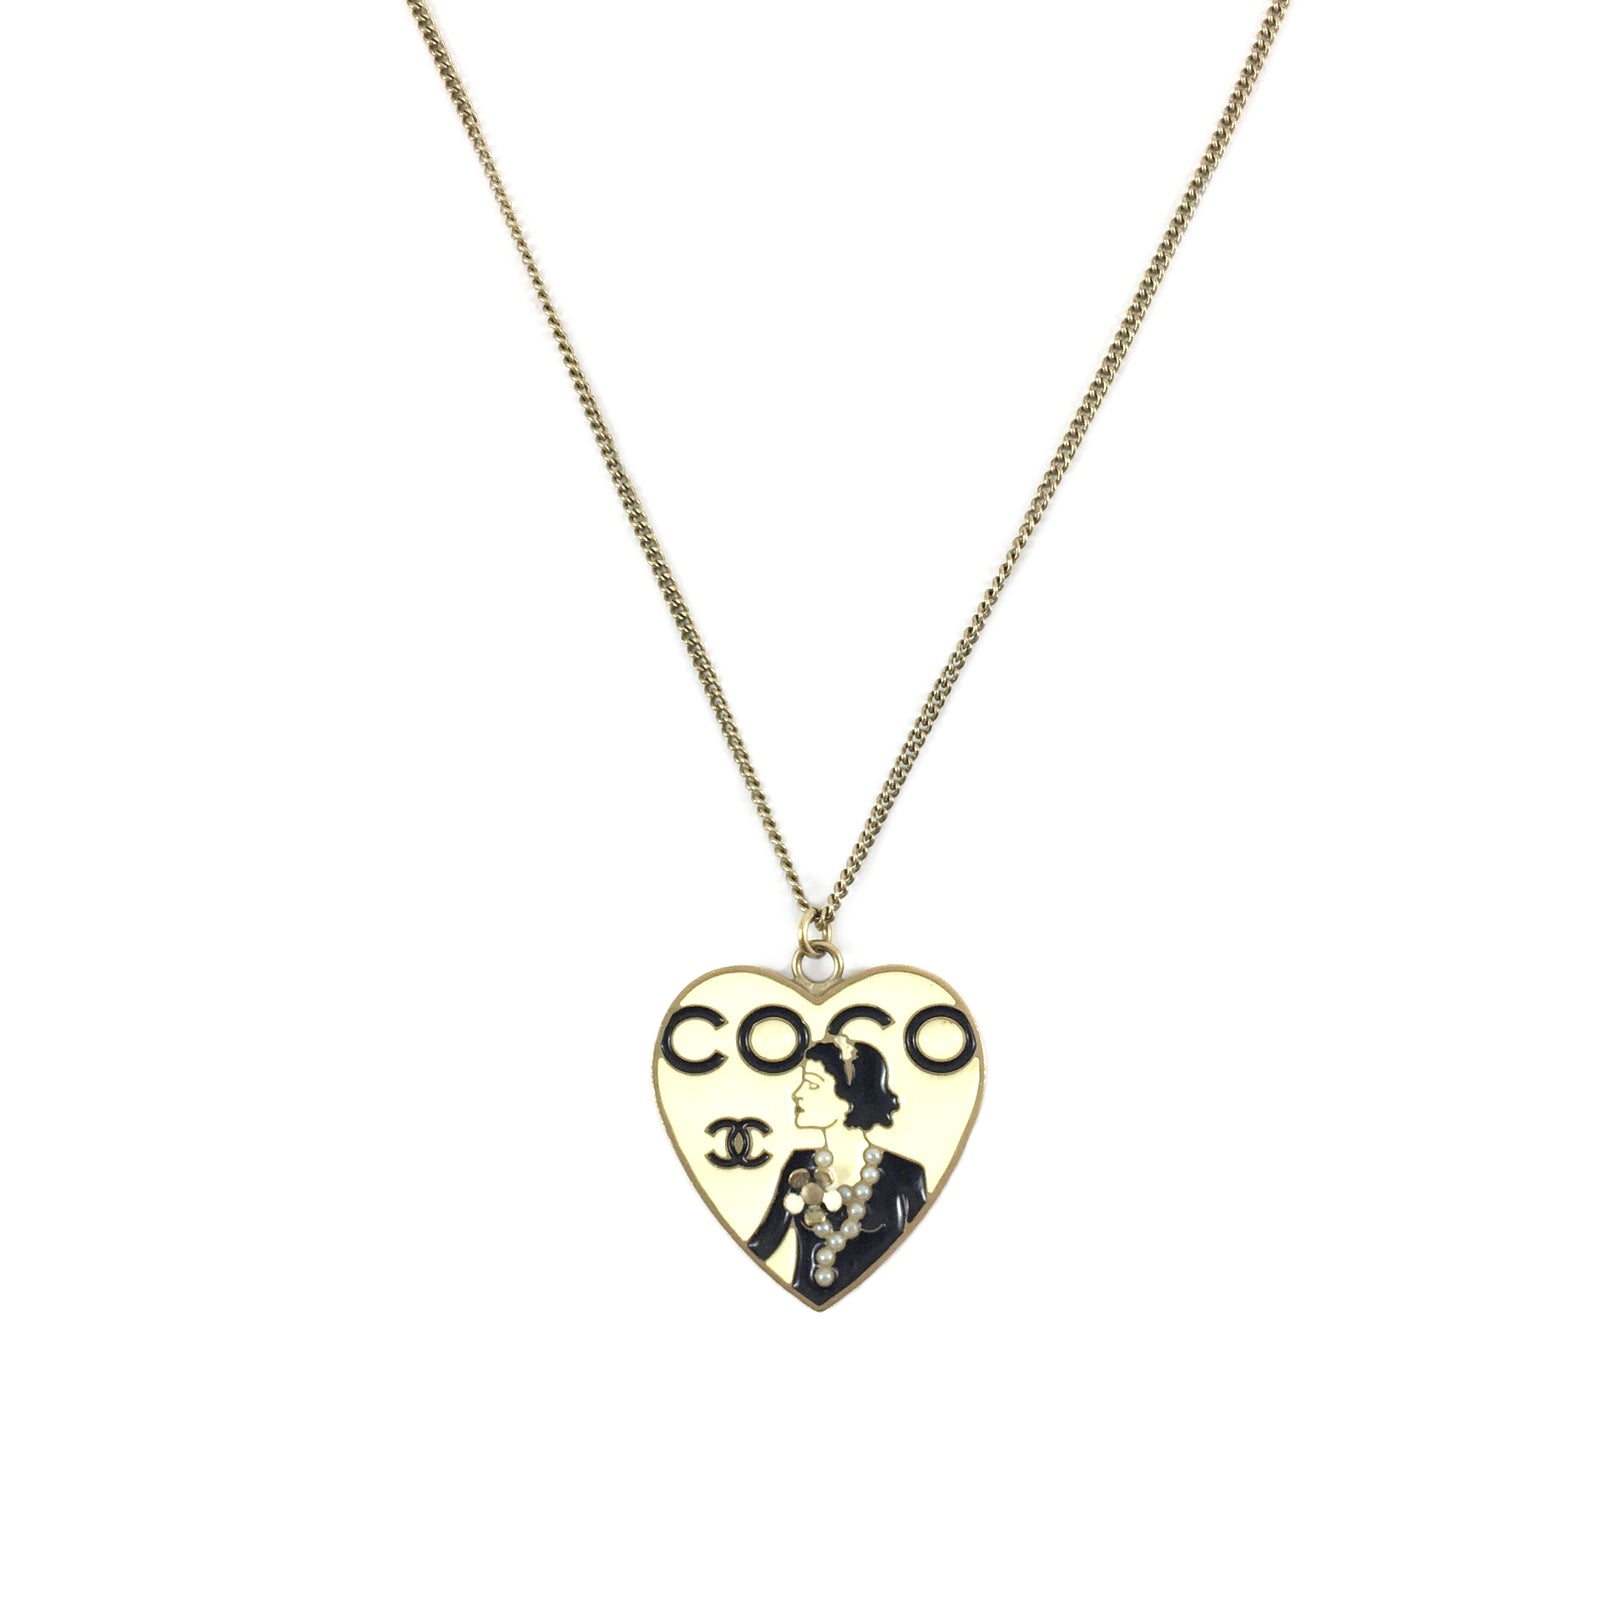 Coco Chanel necklace, Chanel Logo Jewelry - Polyvore